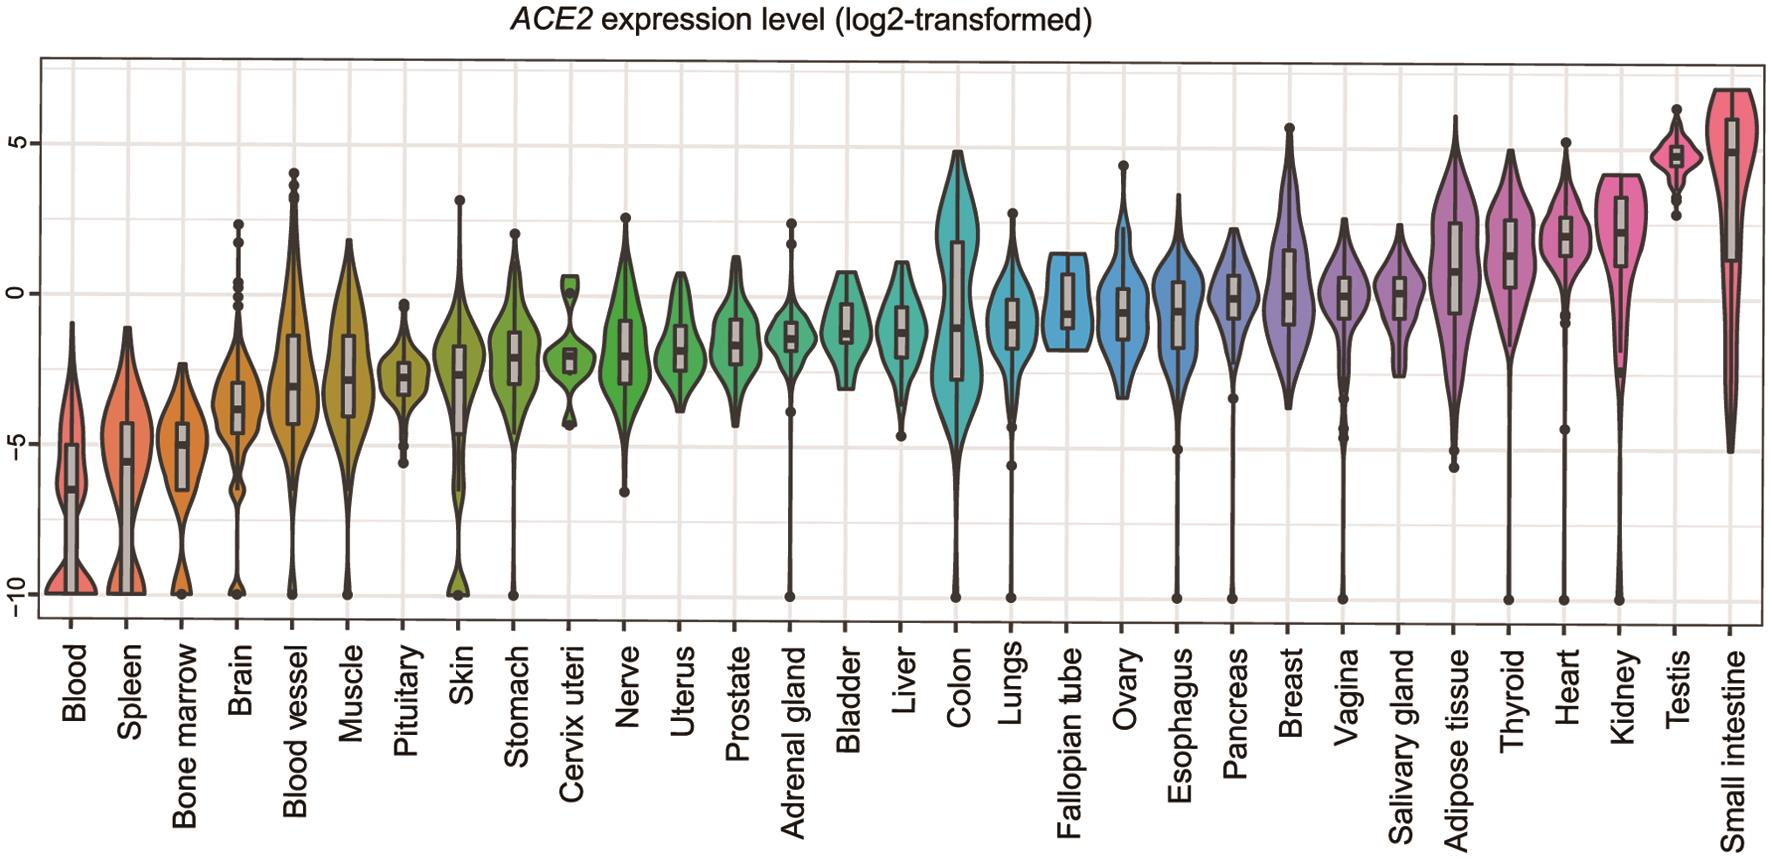 ACE-2 expression level in different organs.